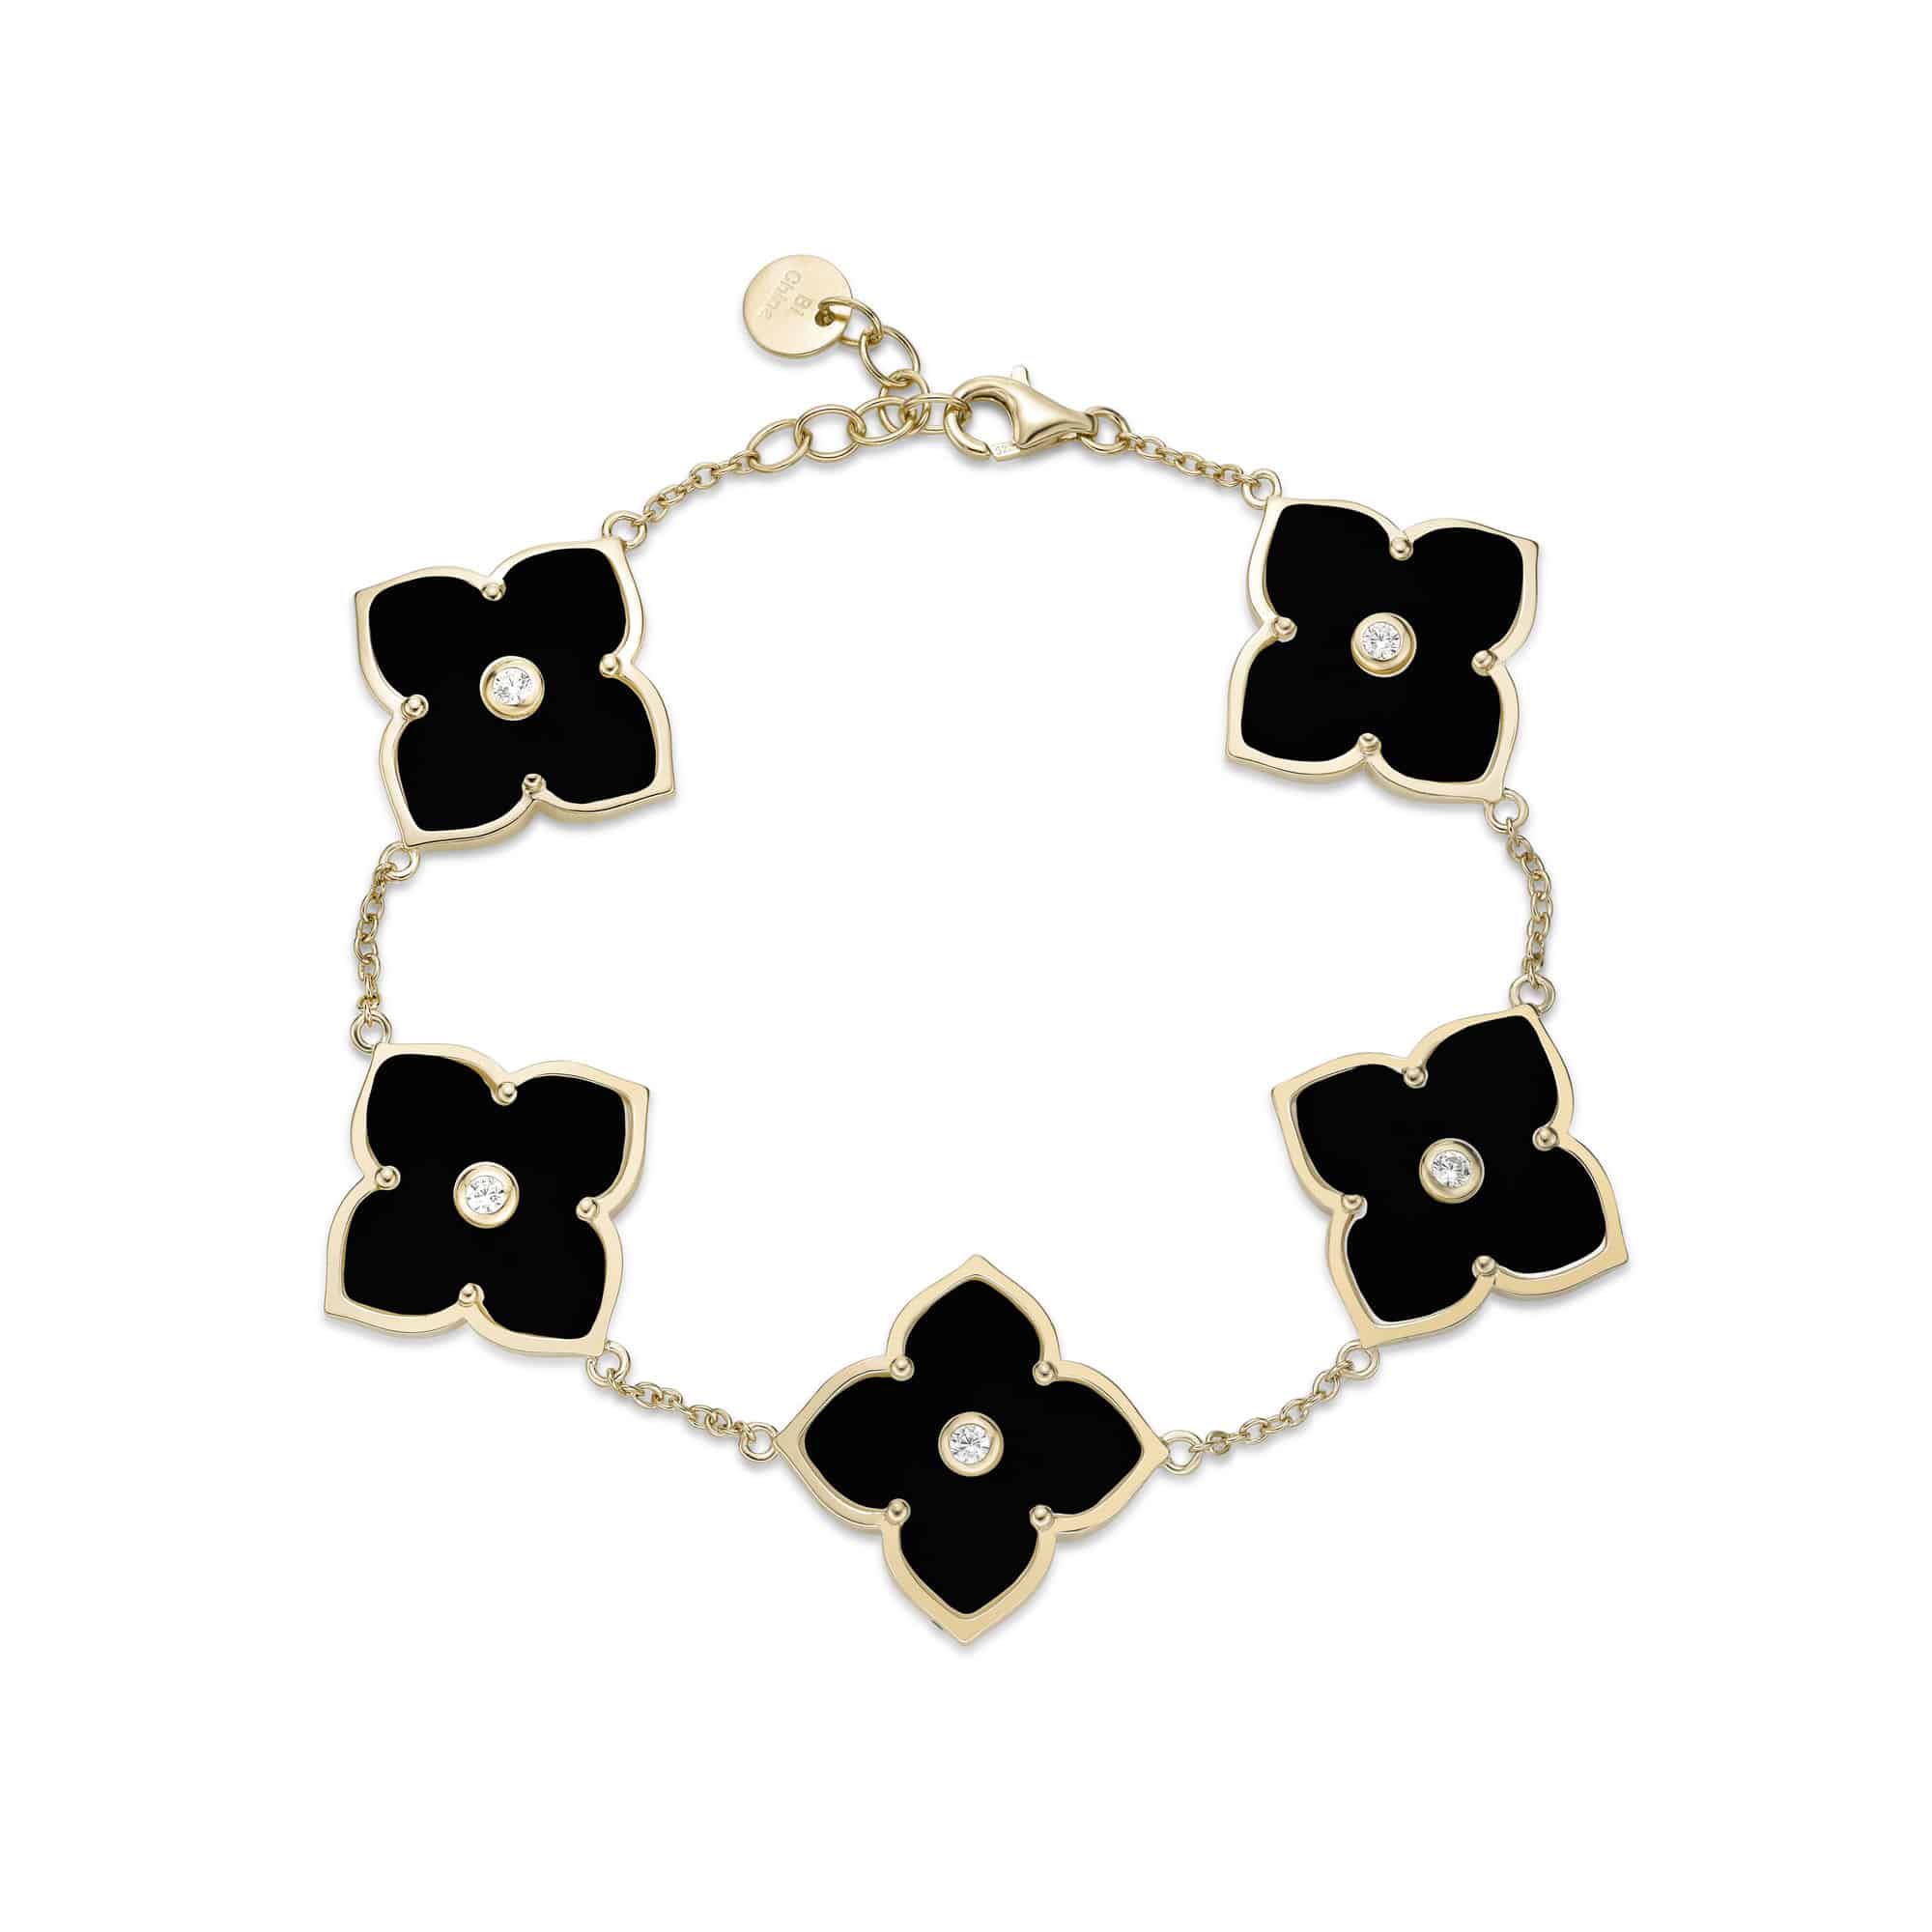 Women's Black Onyx Five-Station Flower Bracelet in Yellow Gold Plated Sterling Silver with Cubic Zirconia - 7-8 Inch Adjustable Cable Chain - Flora | Lavari Jewelers